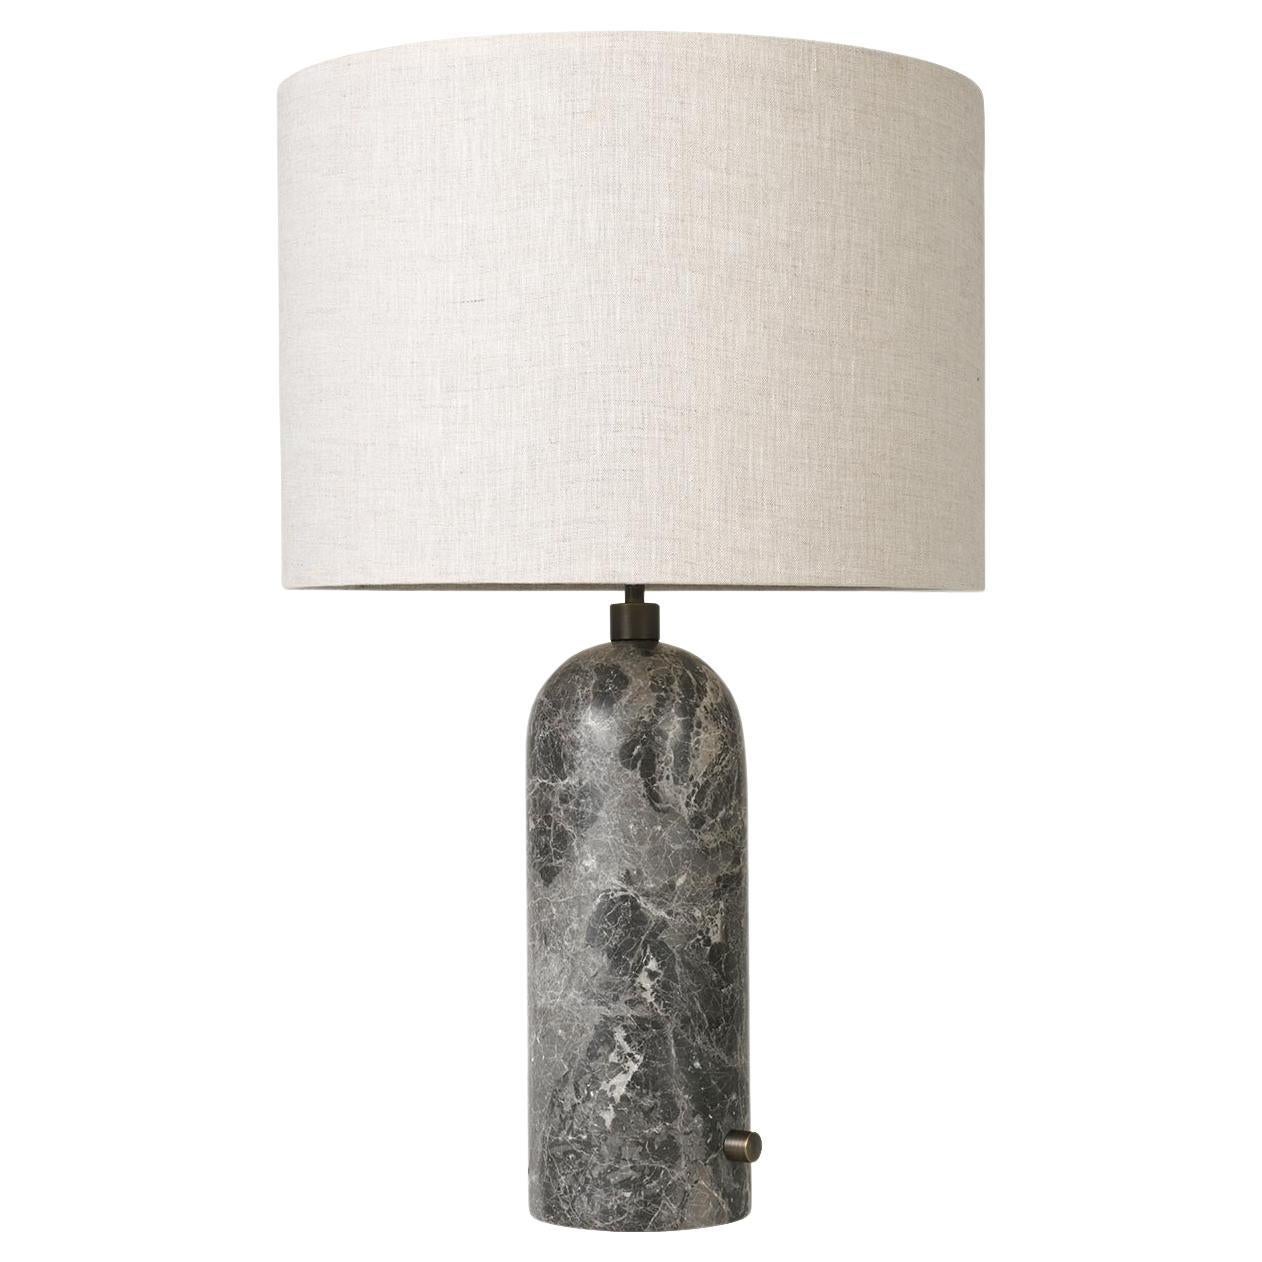 Gravity Table Lamp - Large, Grey Marble, Canvas For Sale